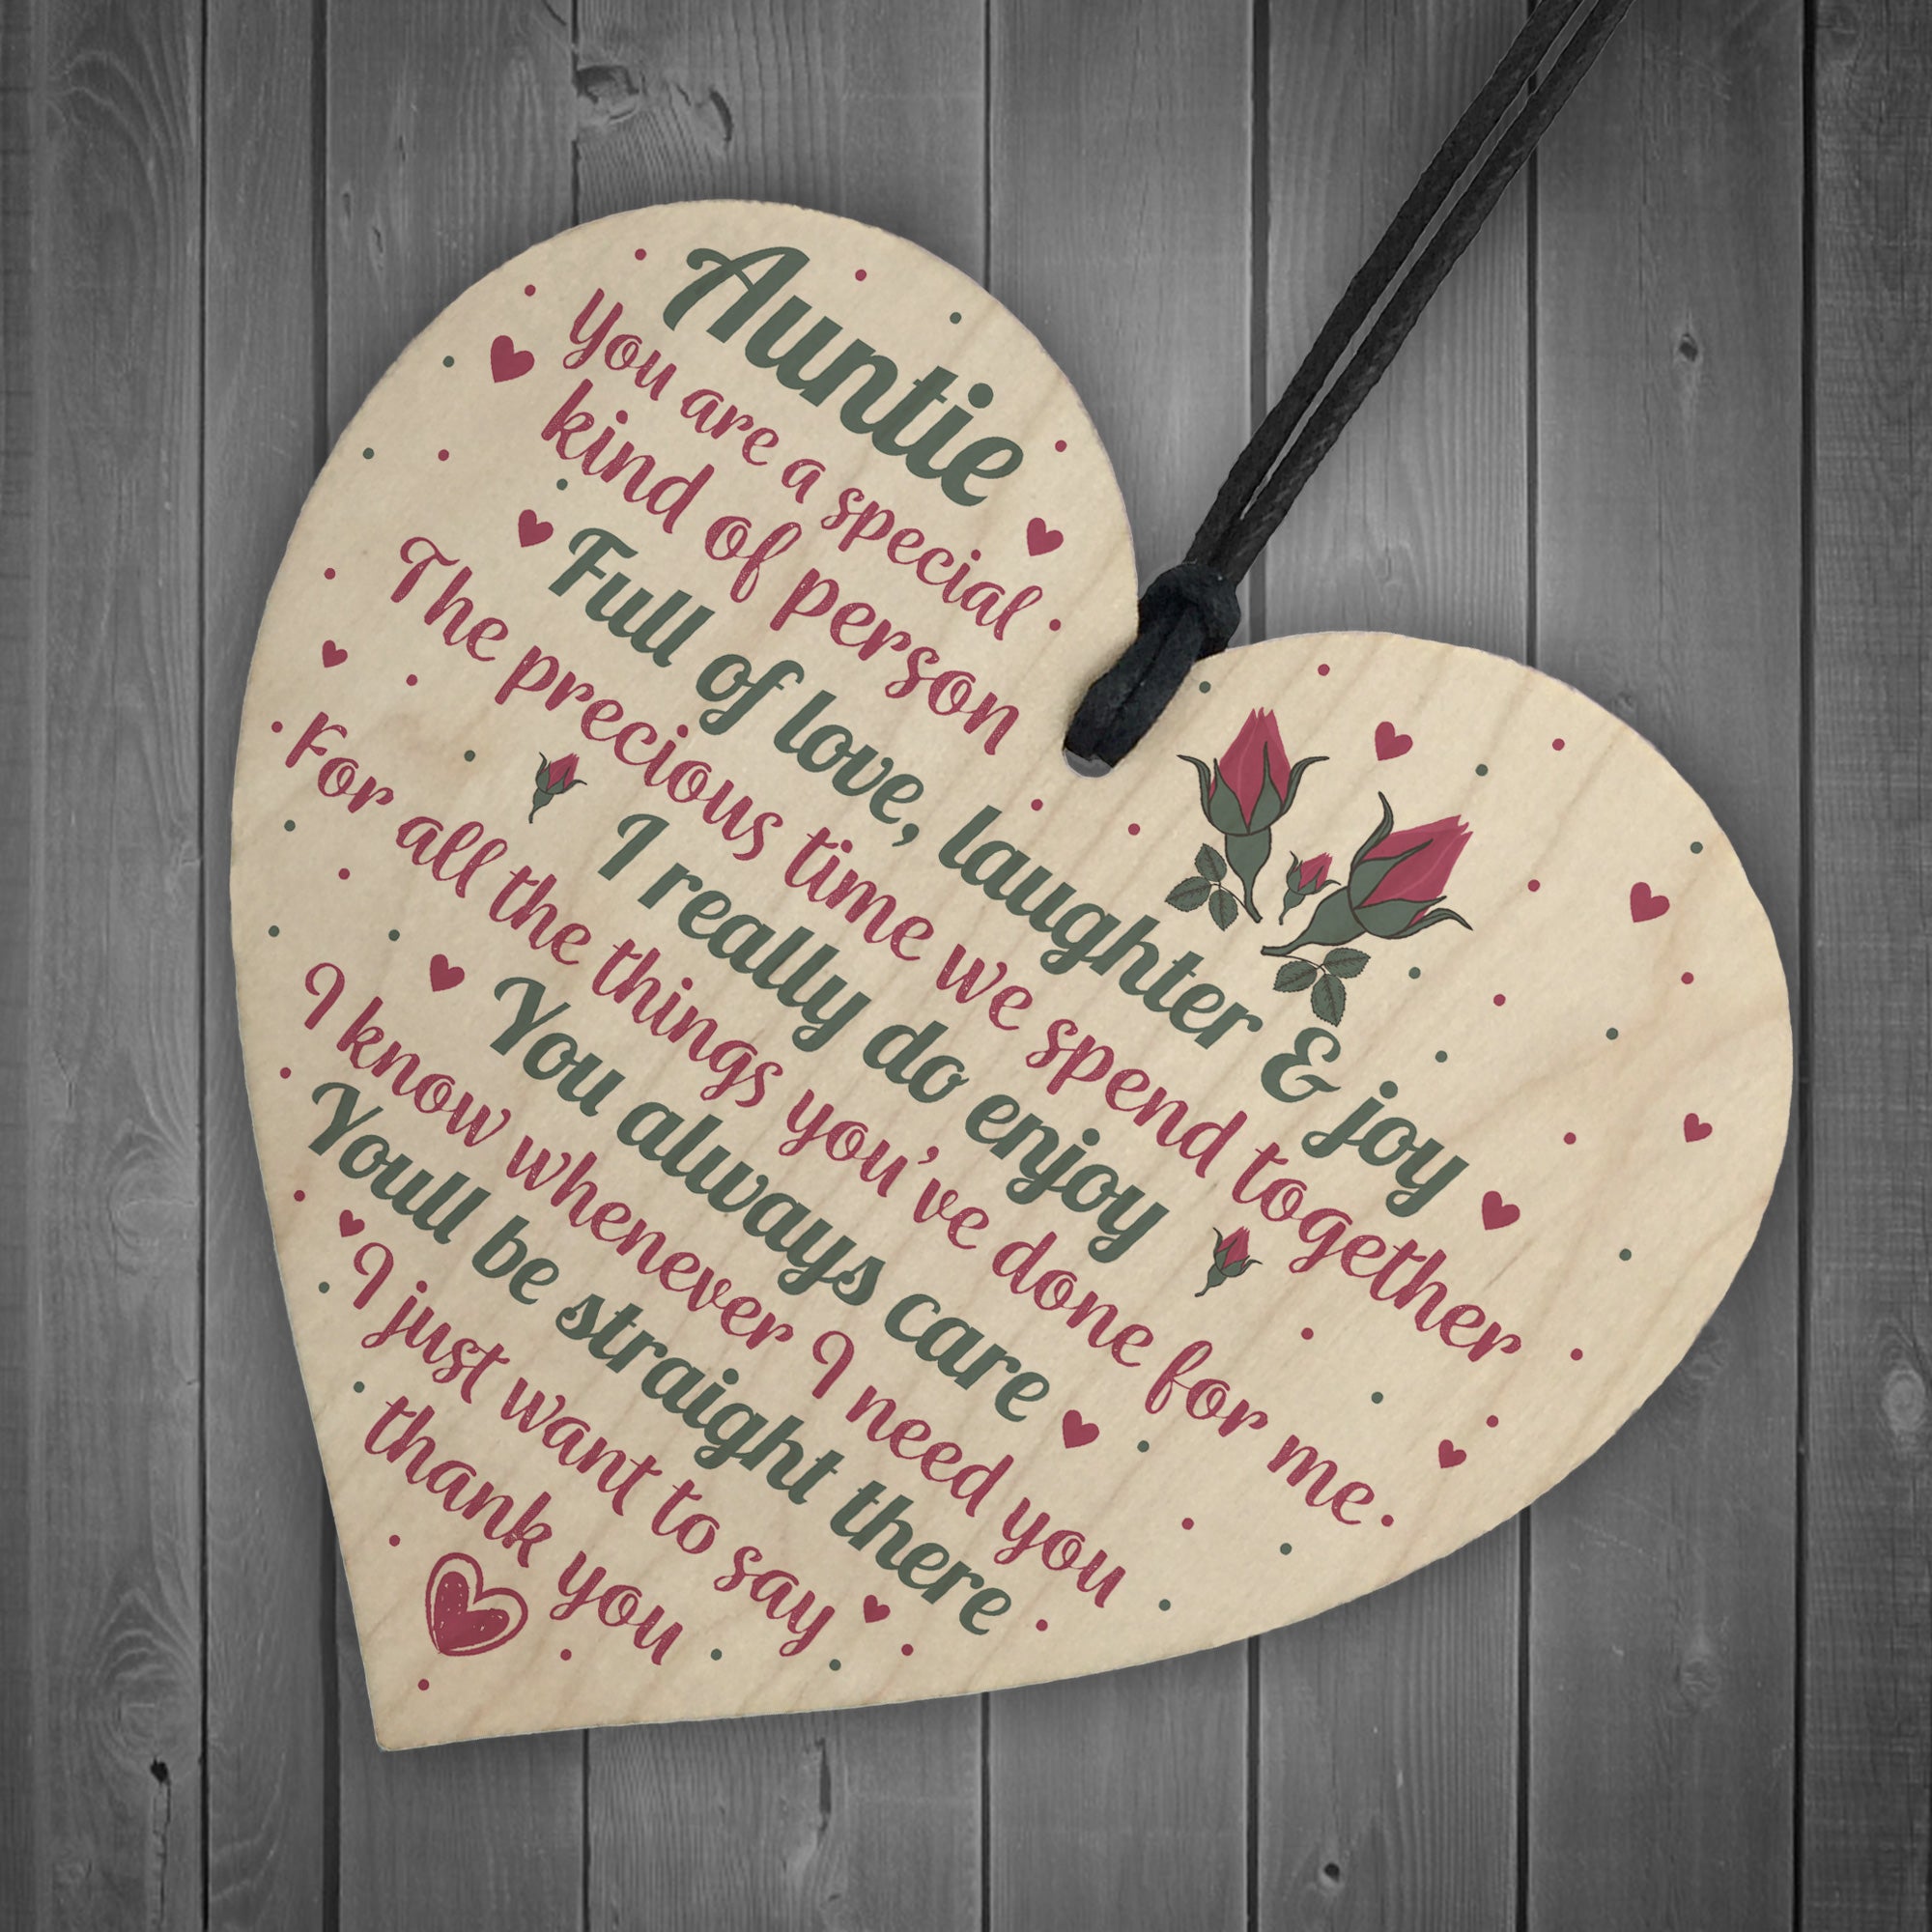 Special FRIEND Sister Gifts Wood Heart Christmas Friendship Gift